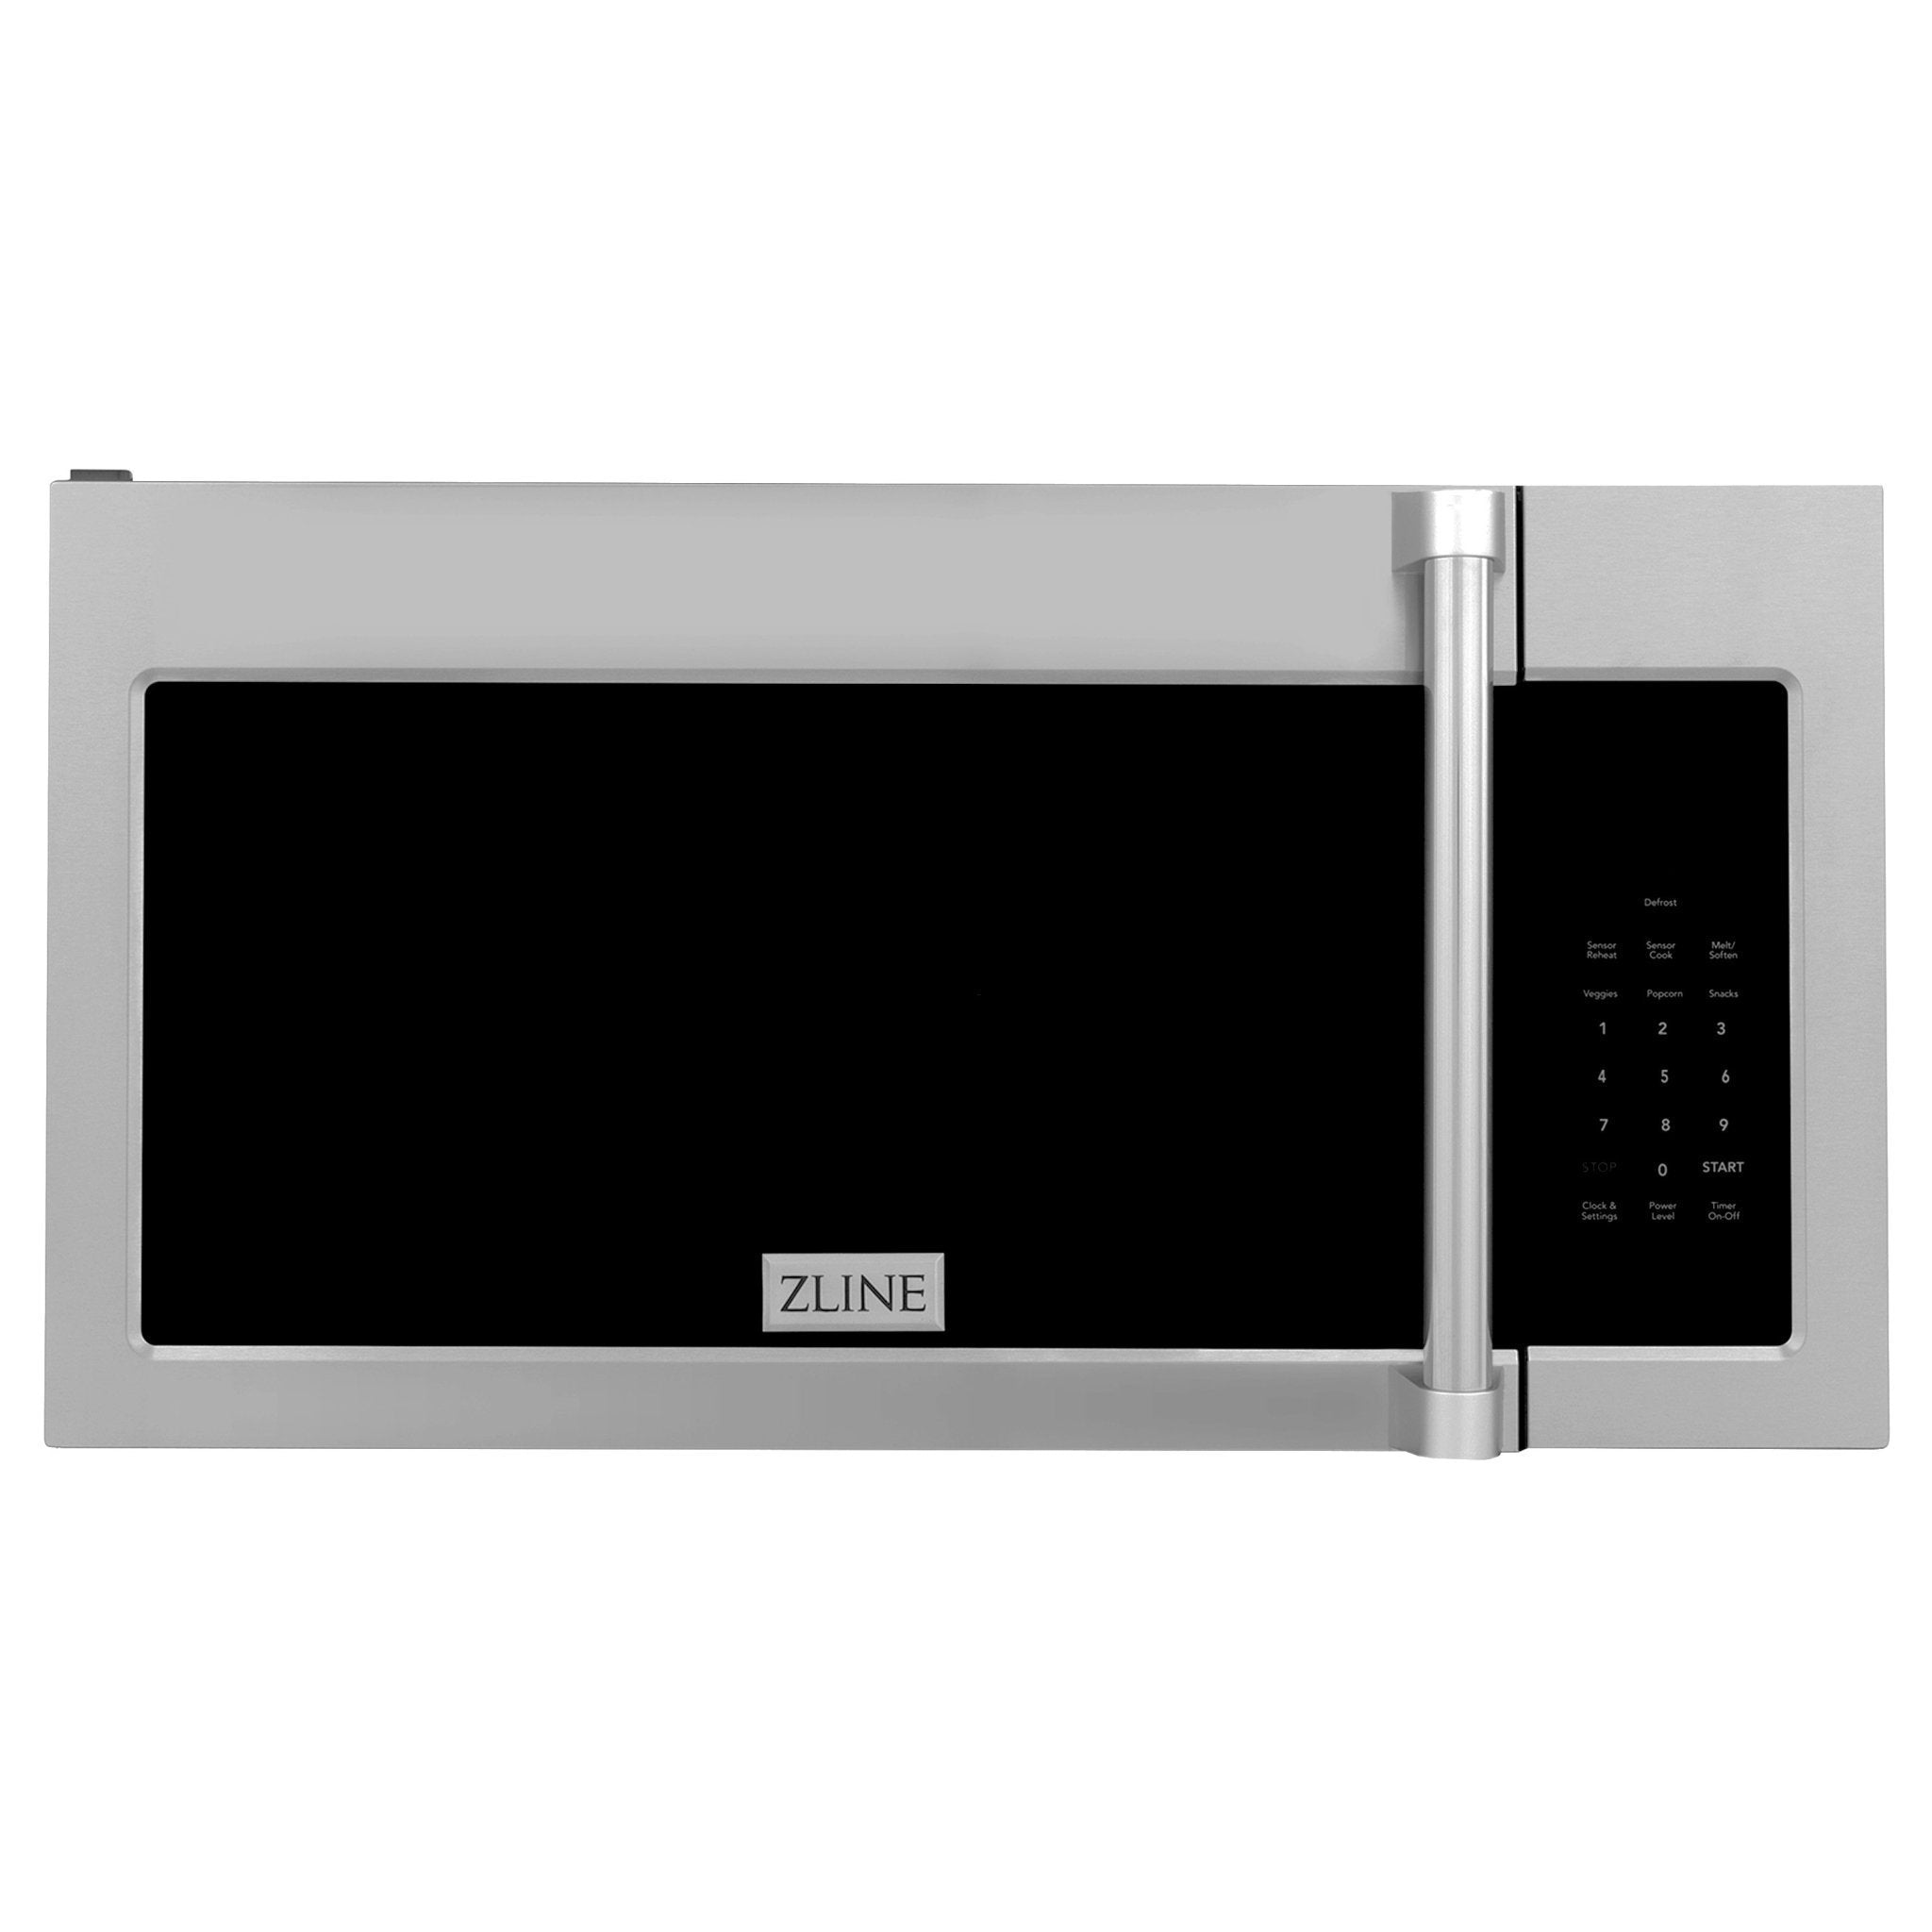 ZLINE Over the Range Microwave Oven in Stainless Steel & Black Stainless Steel with Modern Handle (MWO-OTR-H-30) - Rustic Kitchen & Bath - Microwave - ZLINE Kitchen and Bath